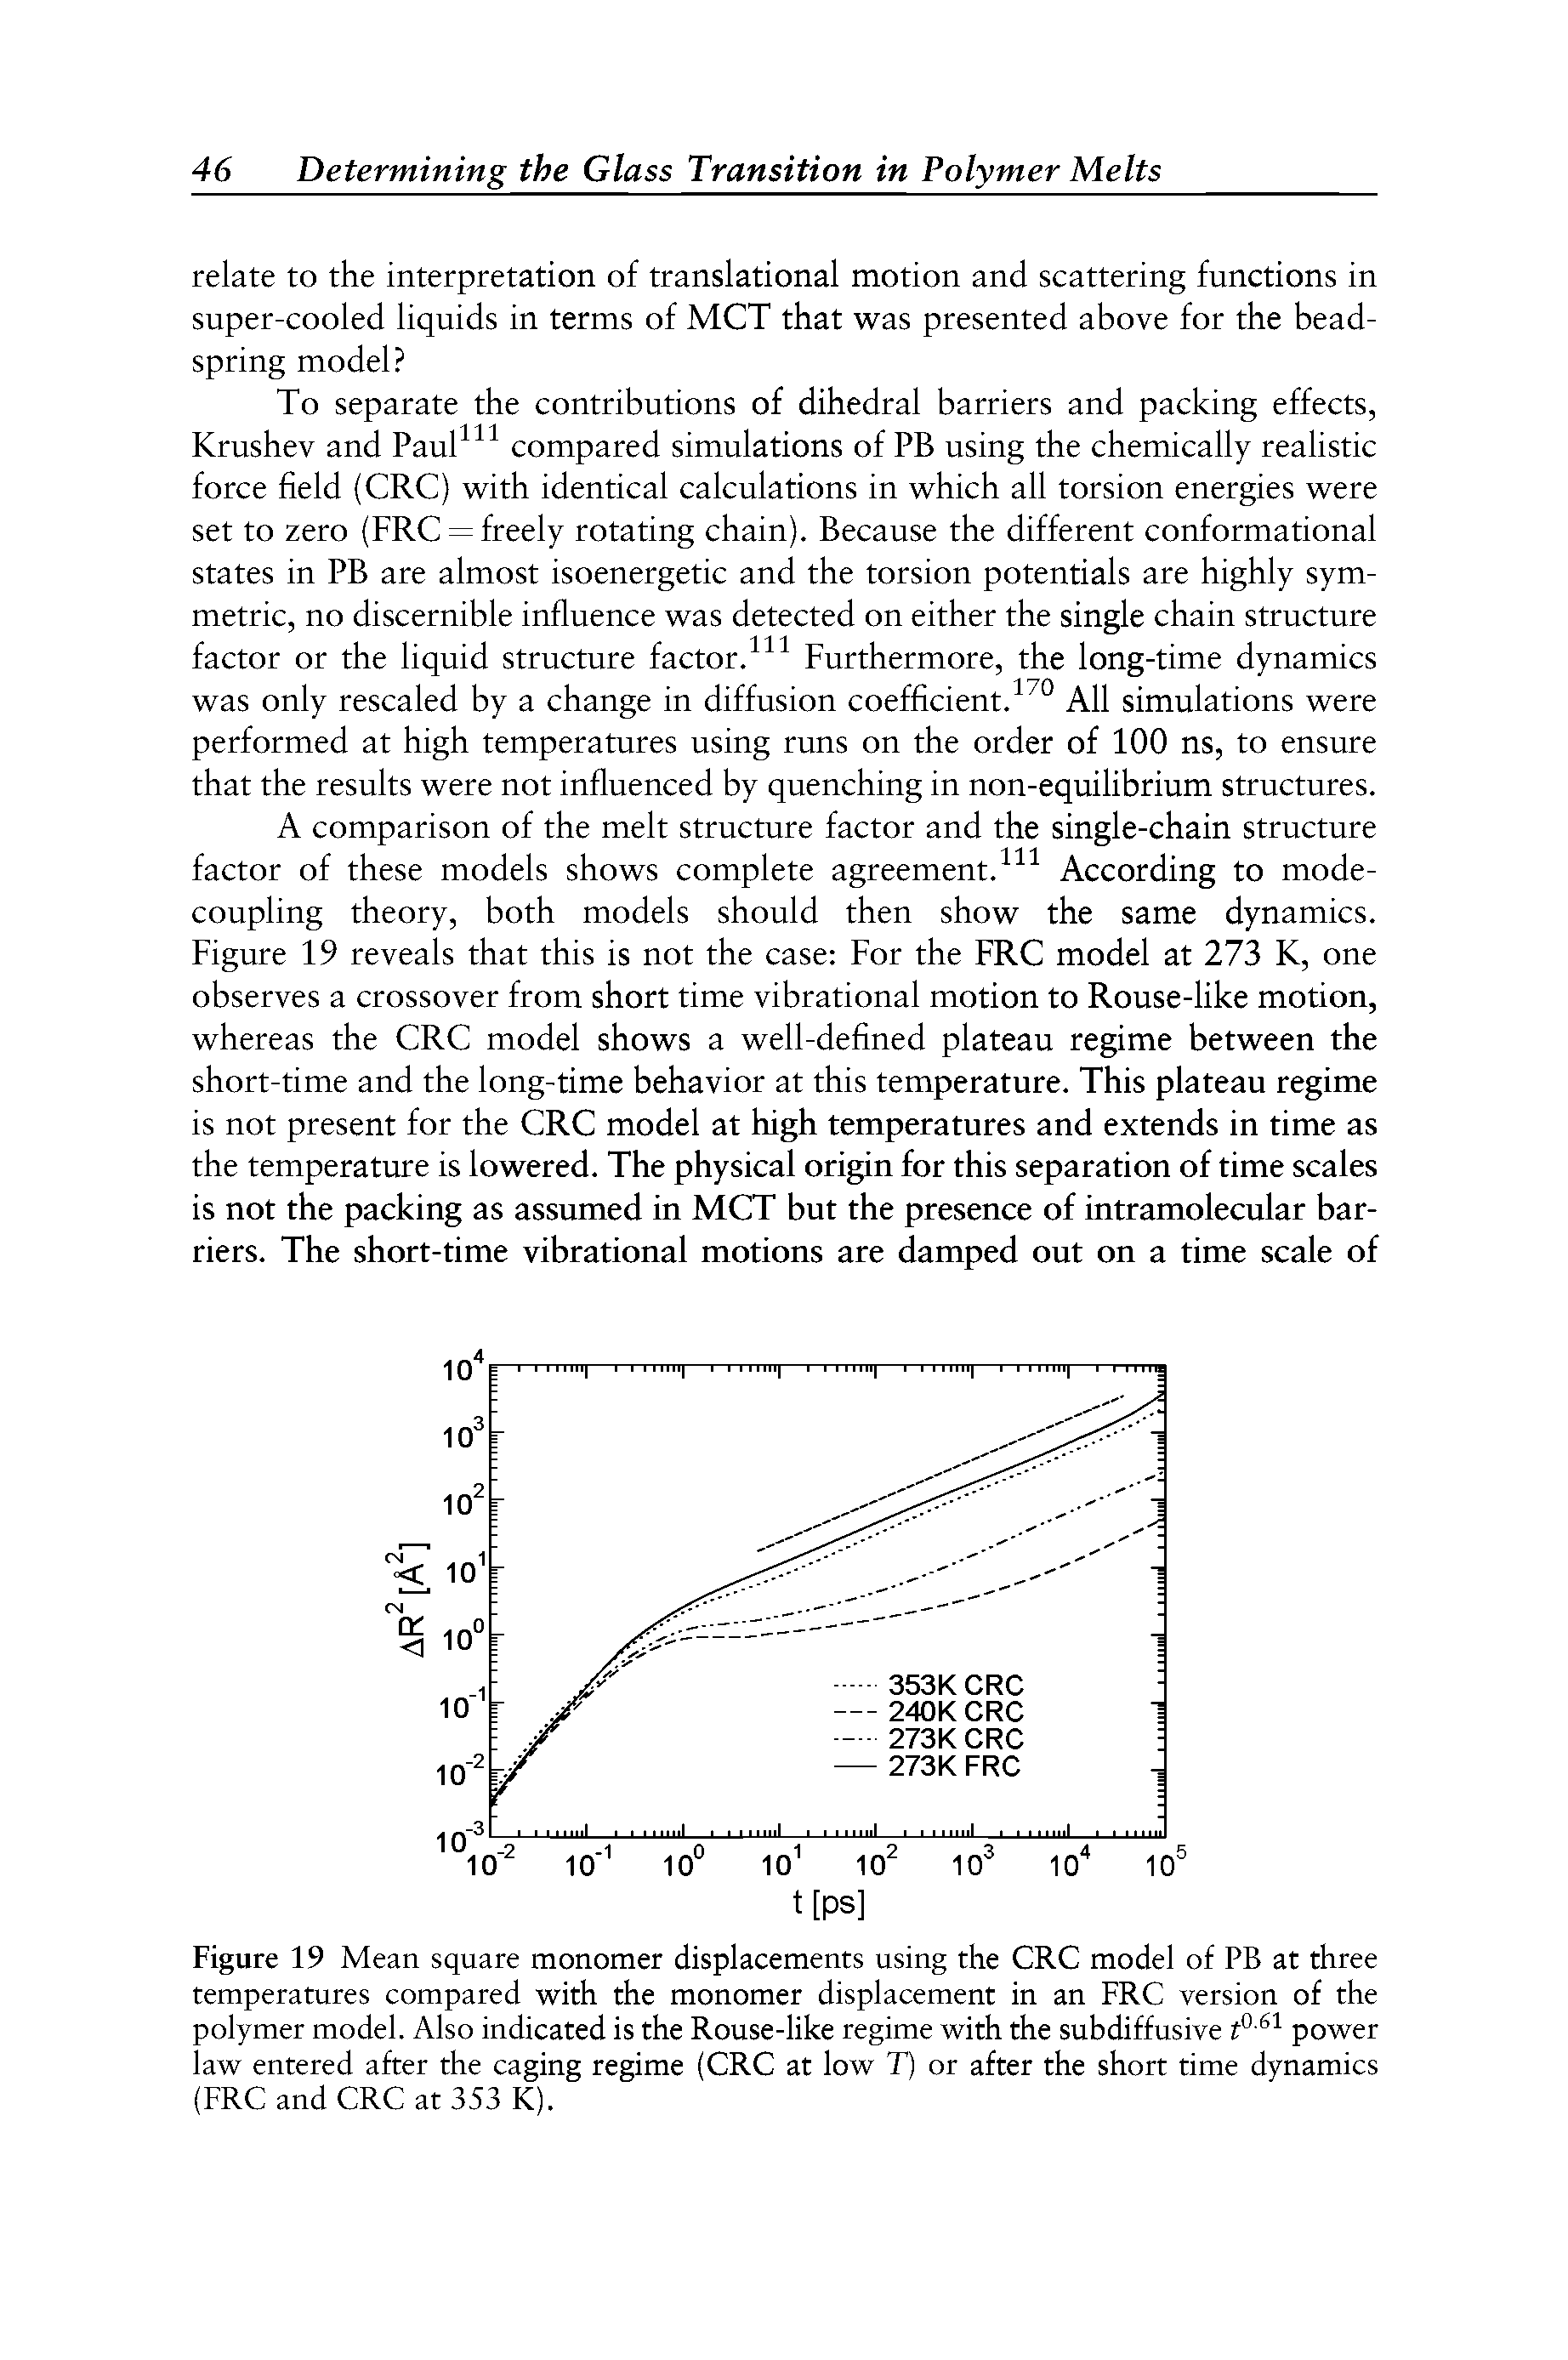 Figure 19 Mean square monomer displacements using the CRC model of PB at three temperatures compared with the monomer displacement in an FRC version of the polymer model. Also indicated is the Rouse-like regime with the subdiffusive t0 61 power law entered after the caging regime (CRC at low T) or after the short time dynamics (FRC and CRC at 353 K).